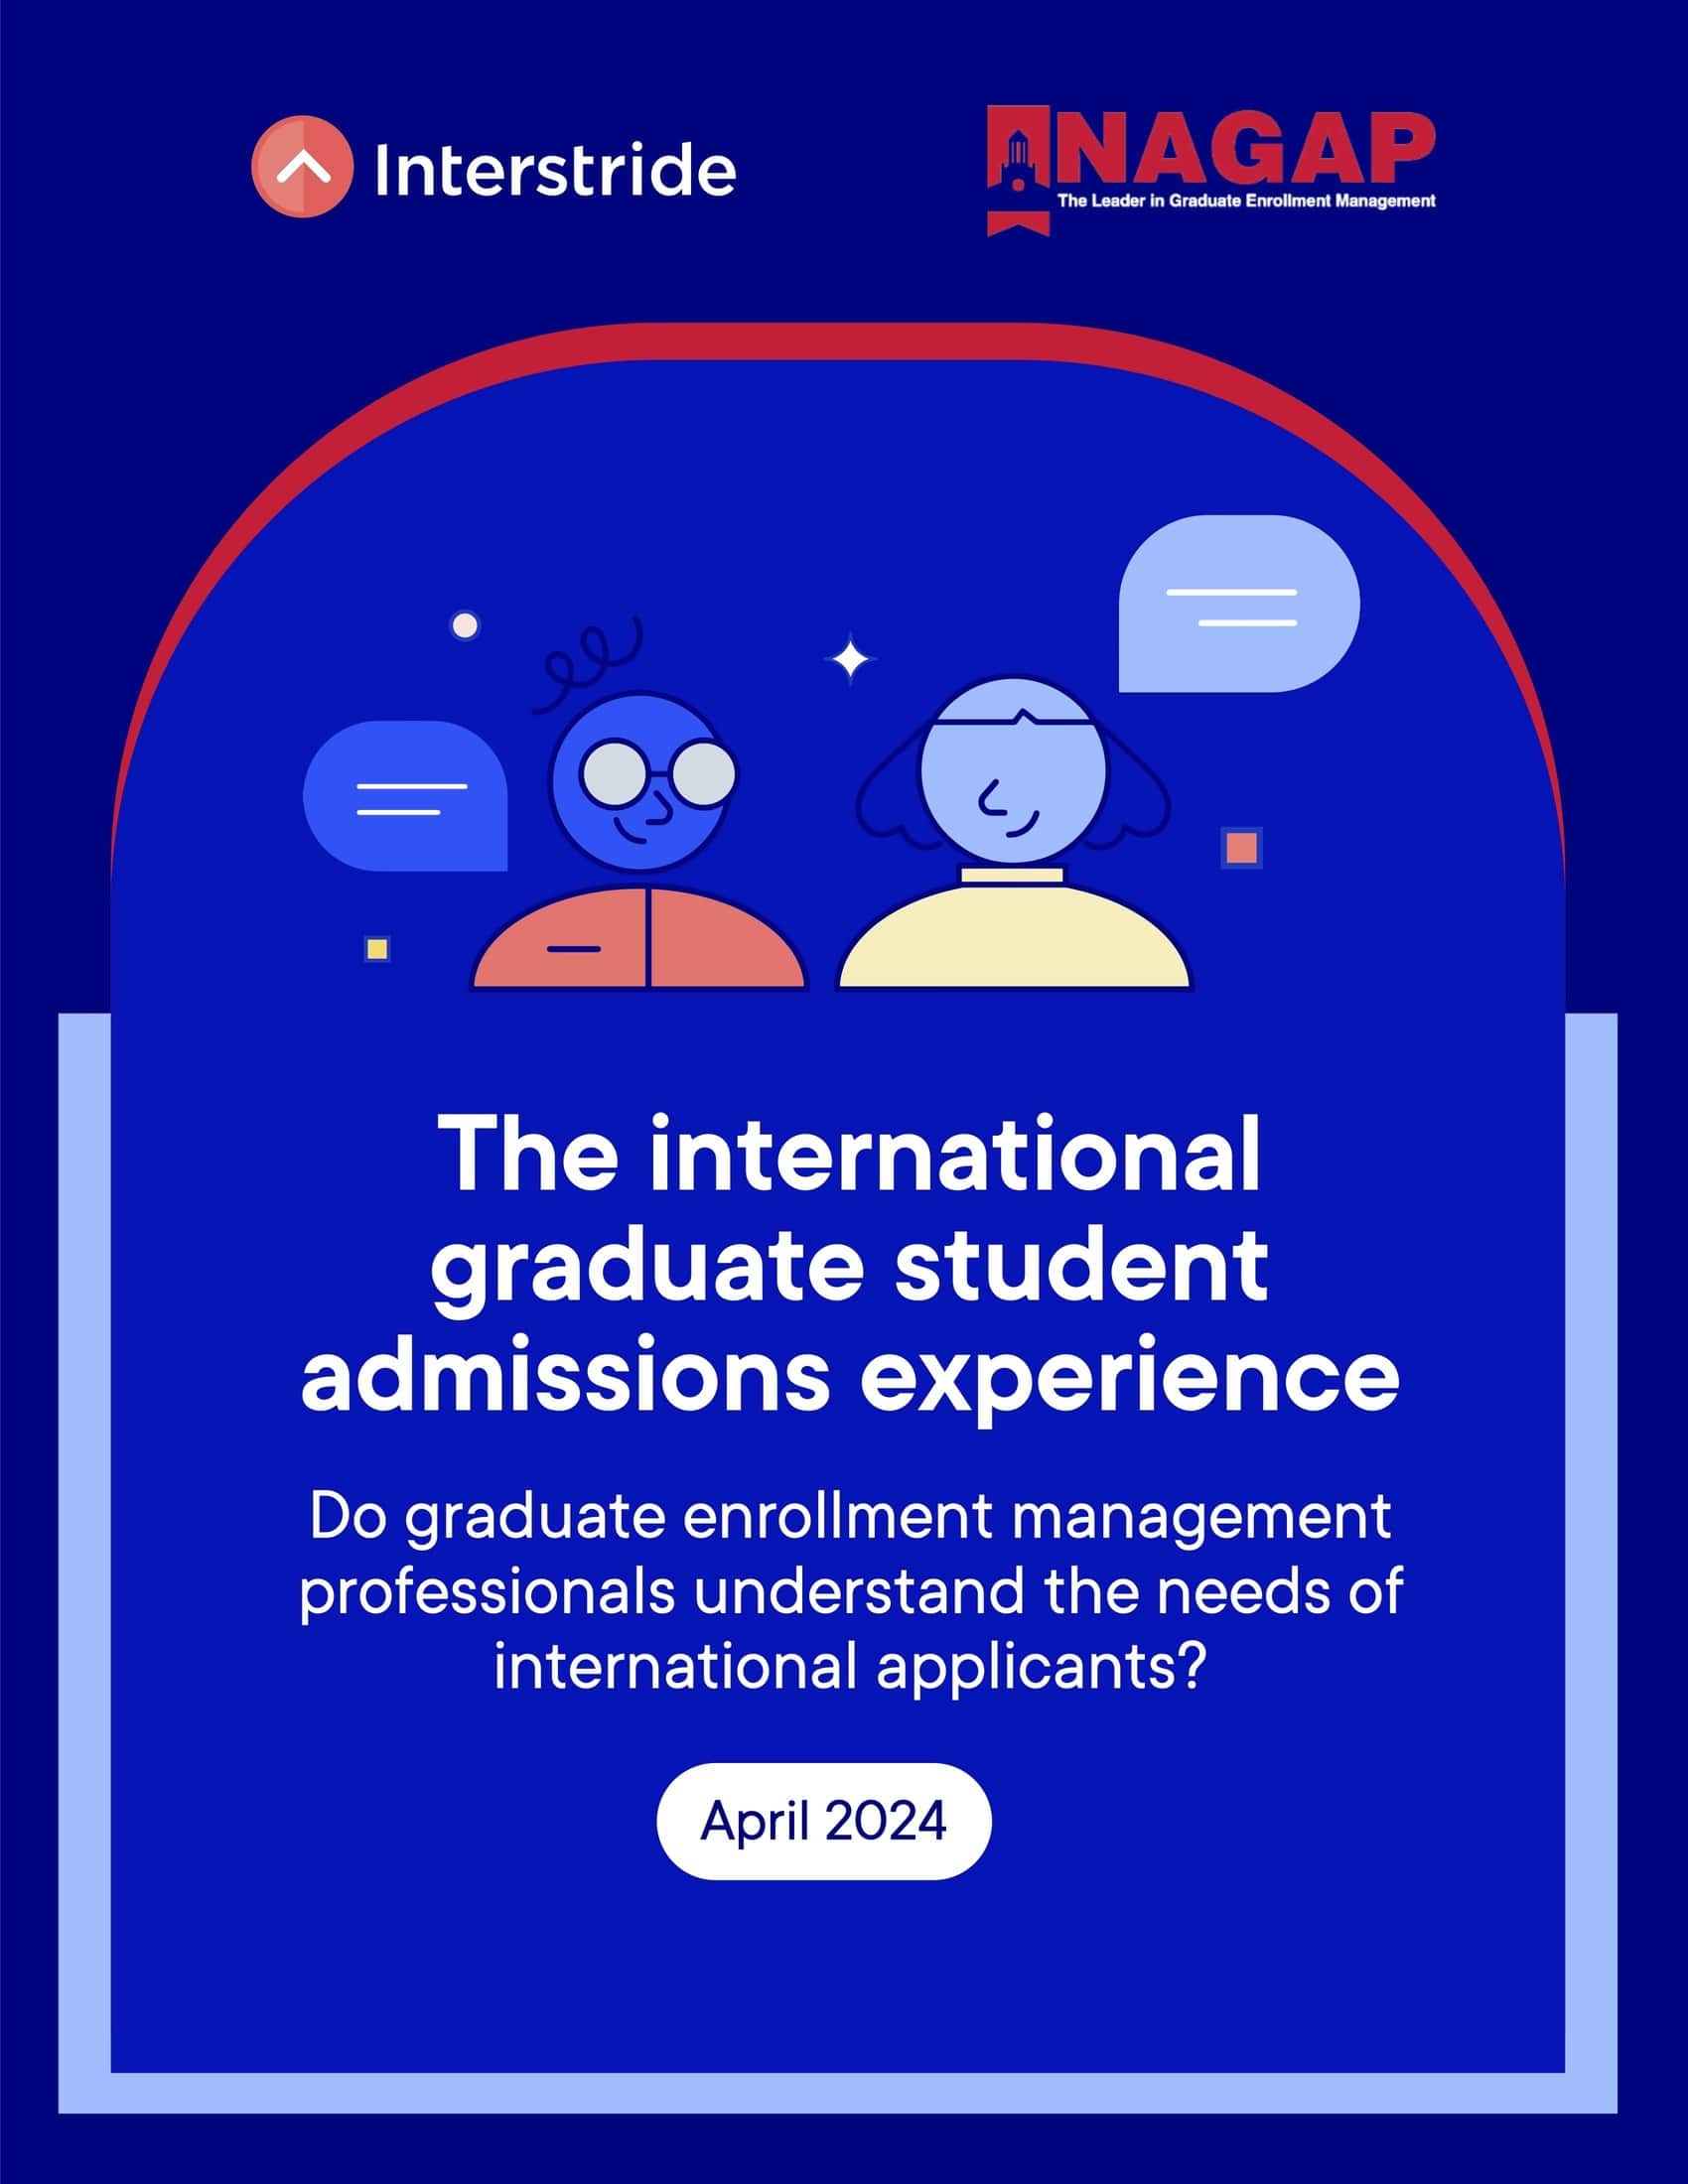 2024 report: Key insights on the international graduate student admissions experience